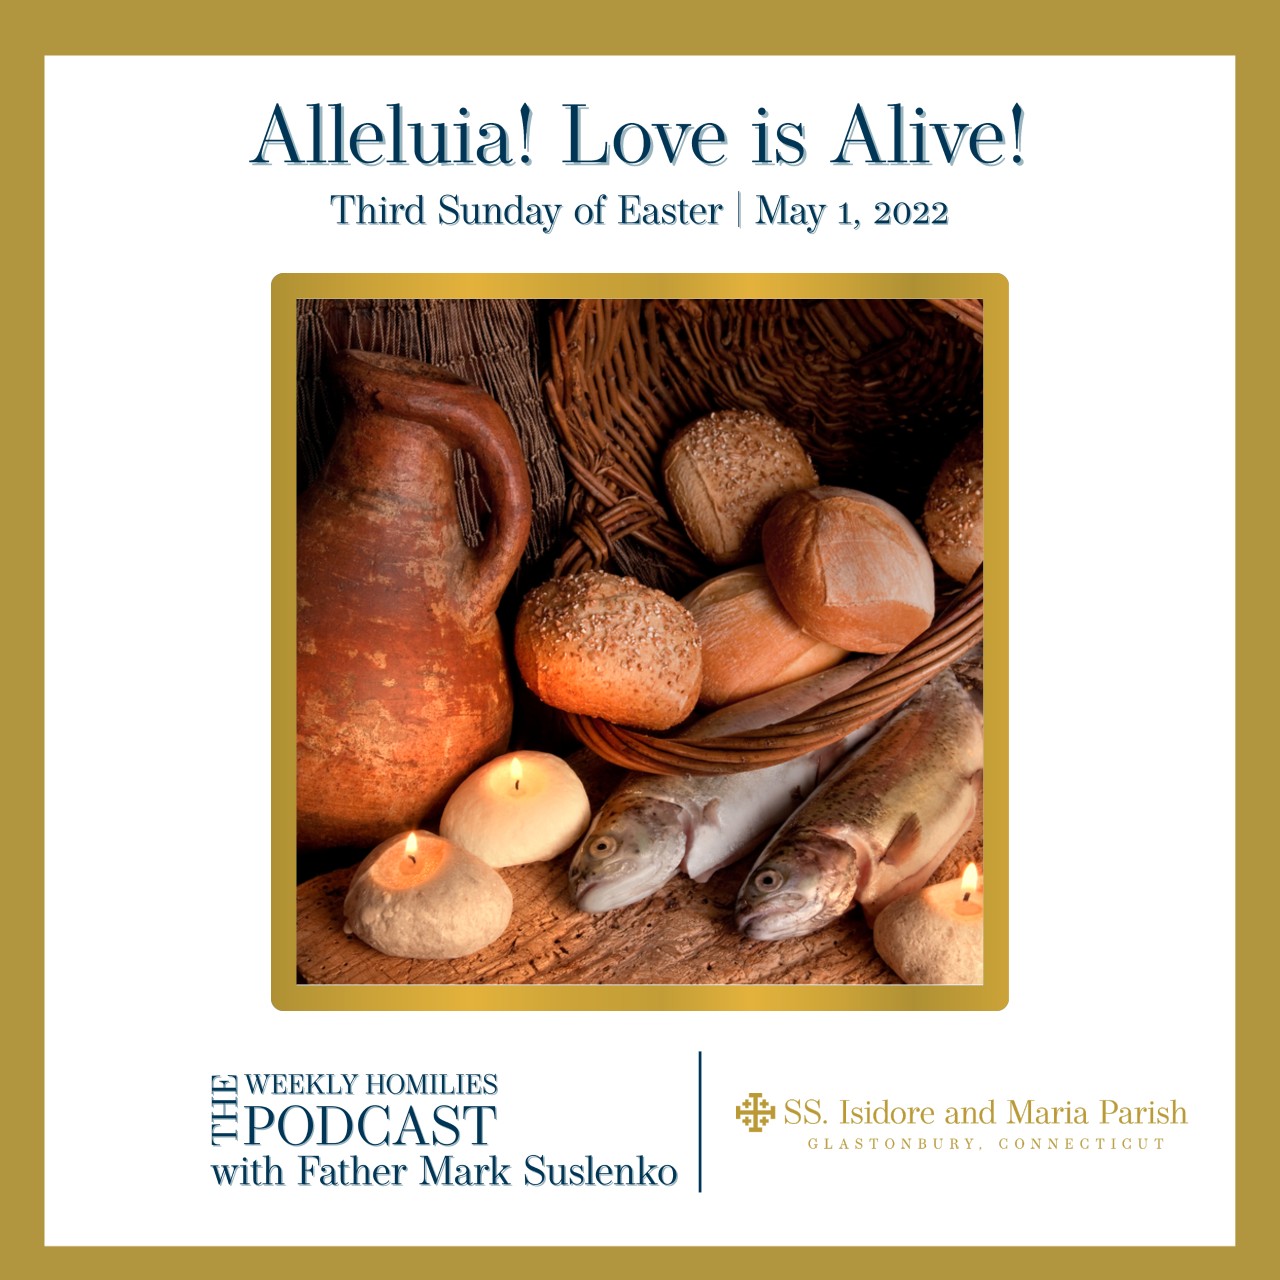 PODCAST: Alleluia! Love is Alive!